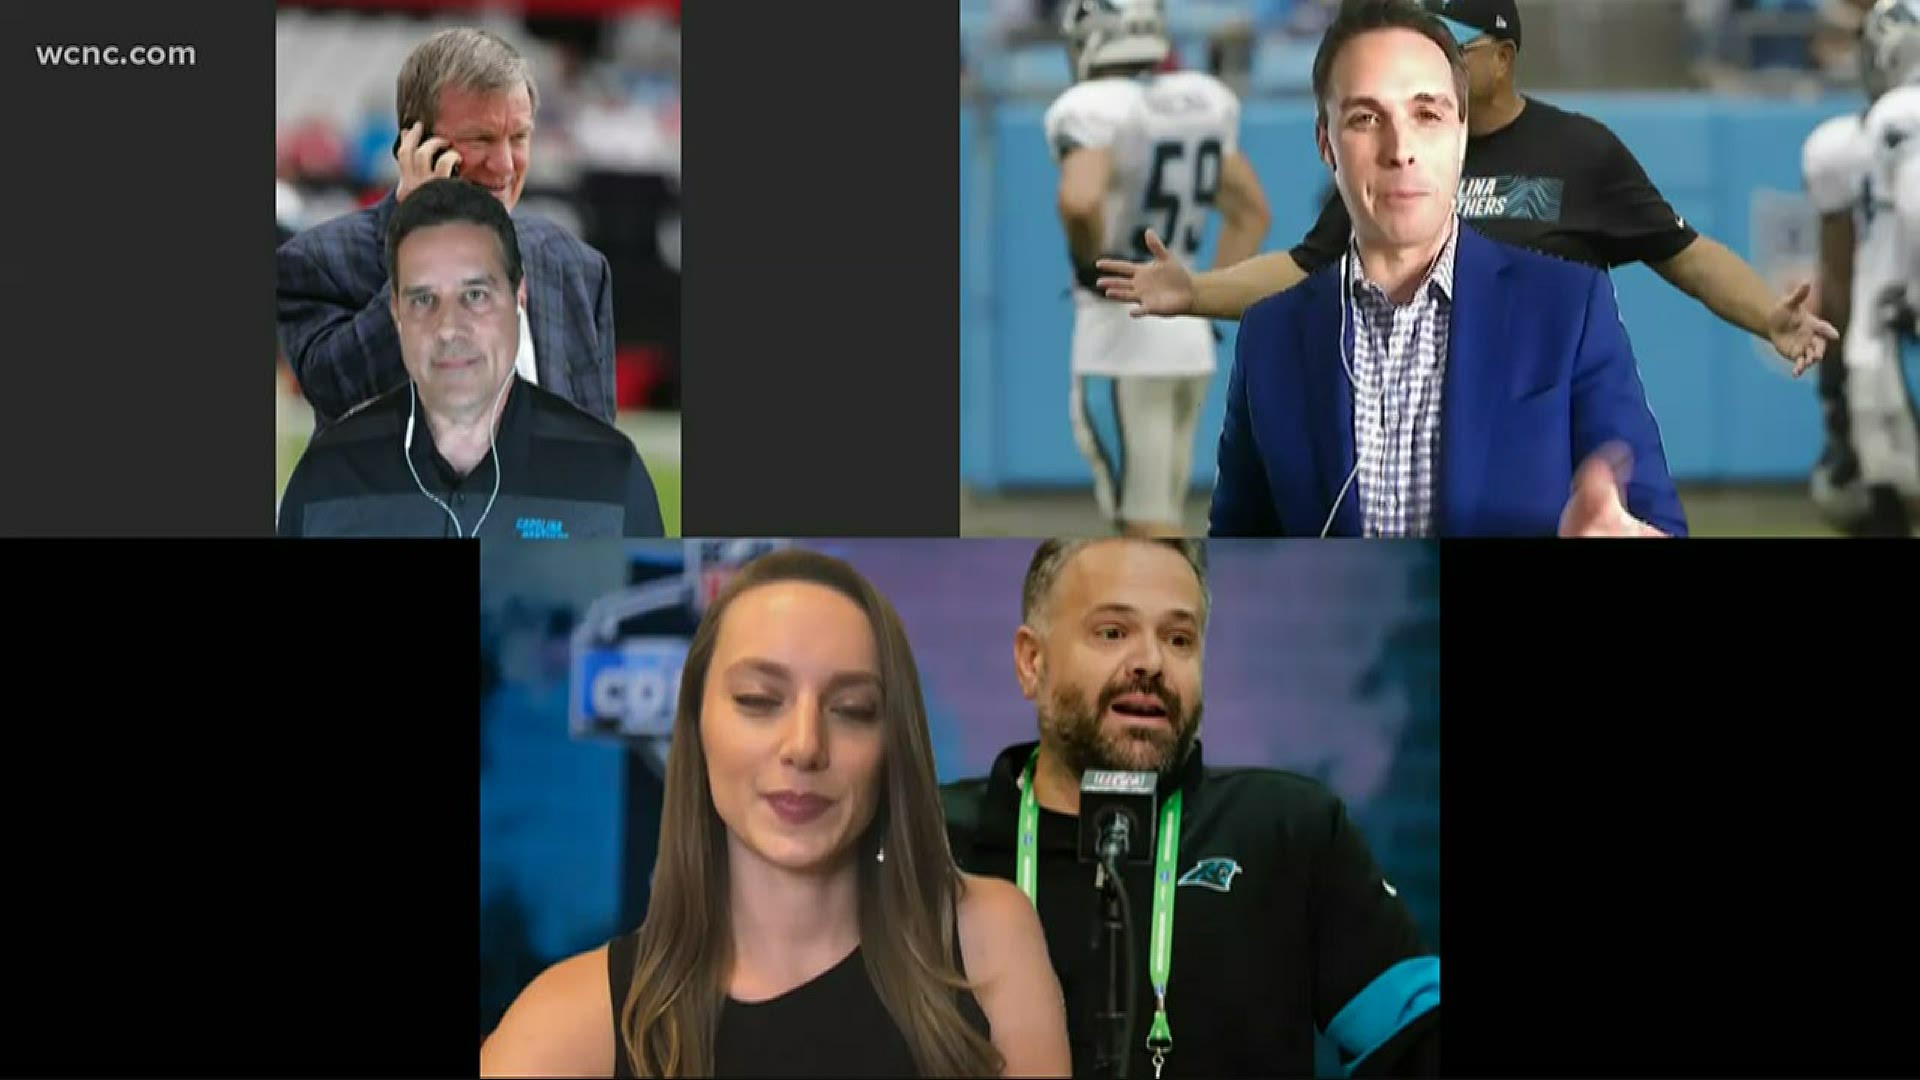 The WCNC Charlotte sports team holds a virtual, mock draft ahead of the NFL draft.